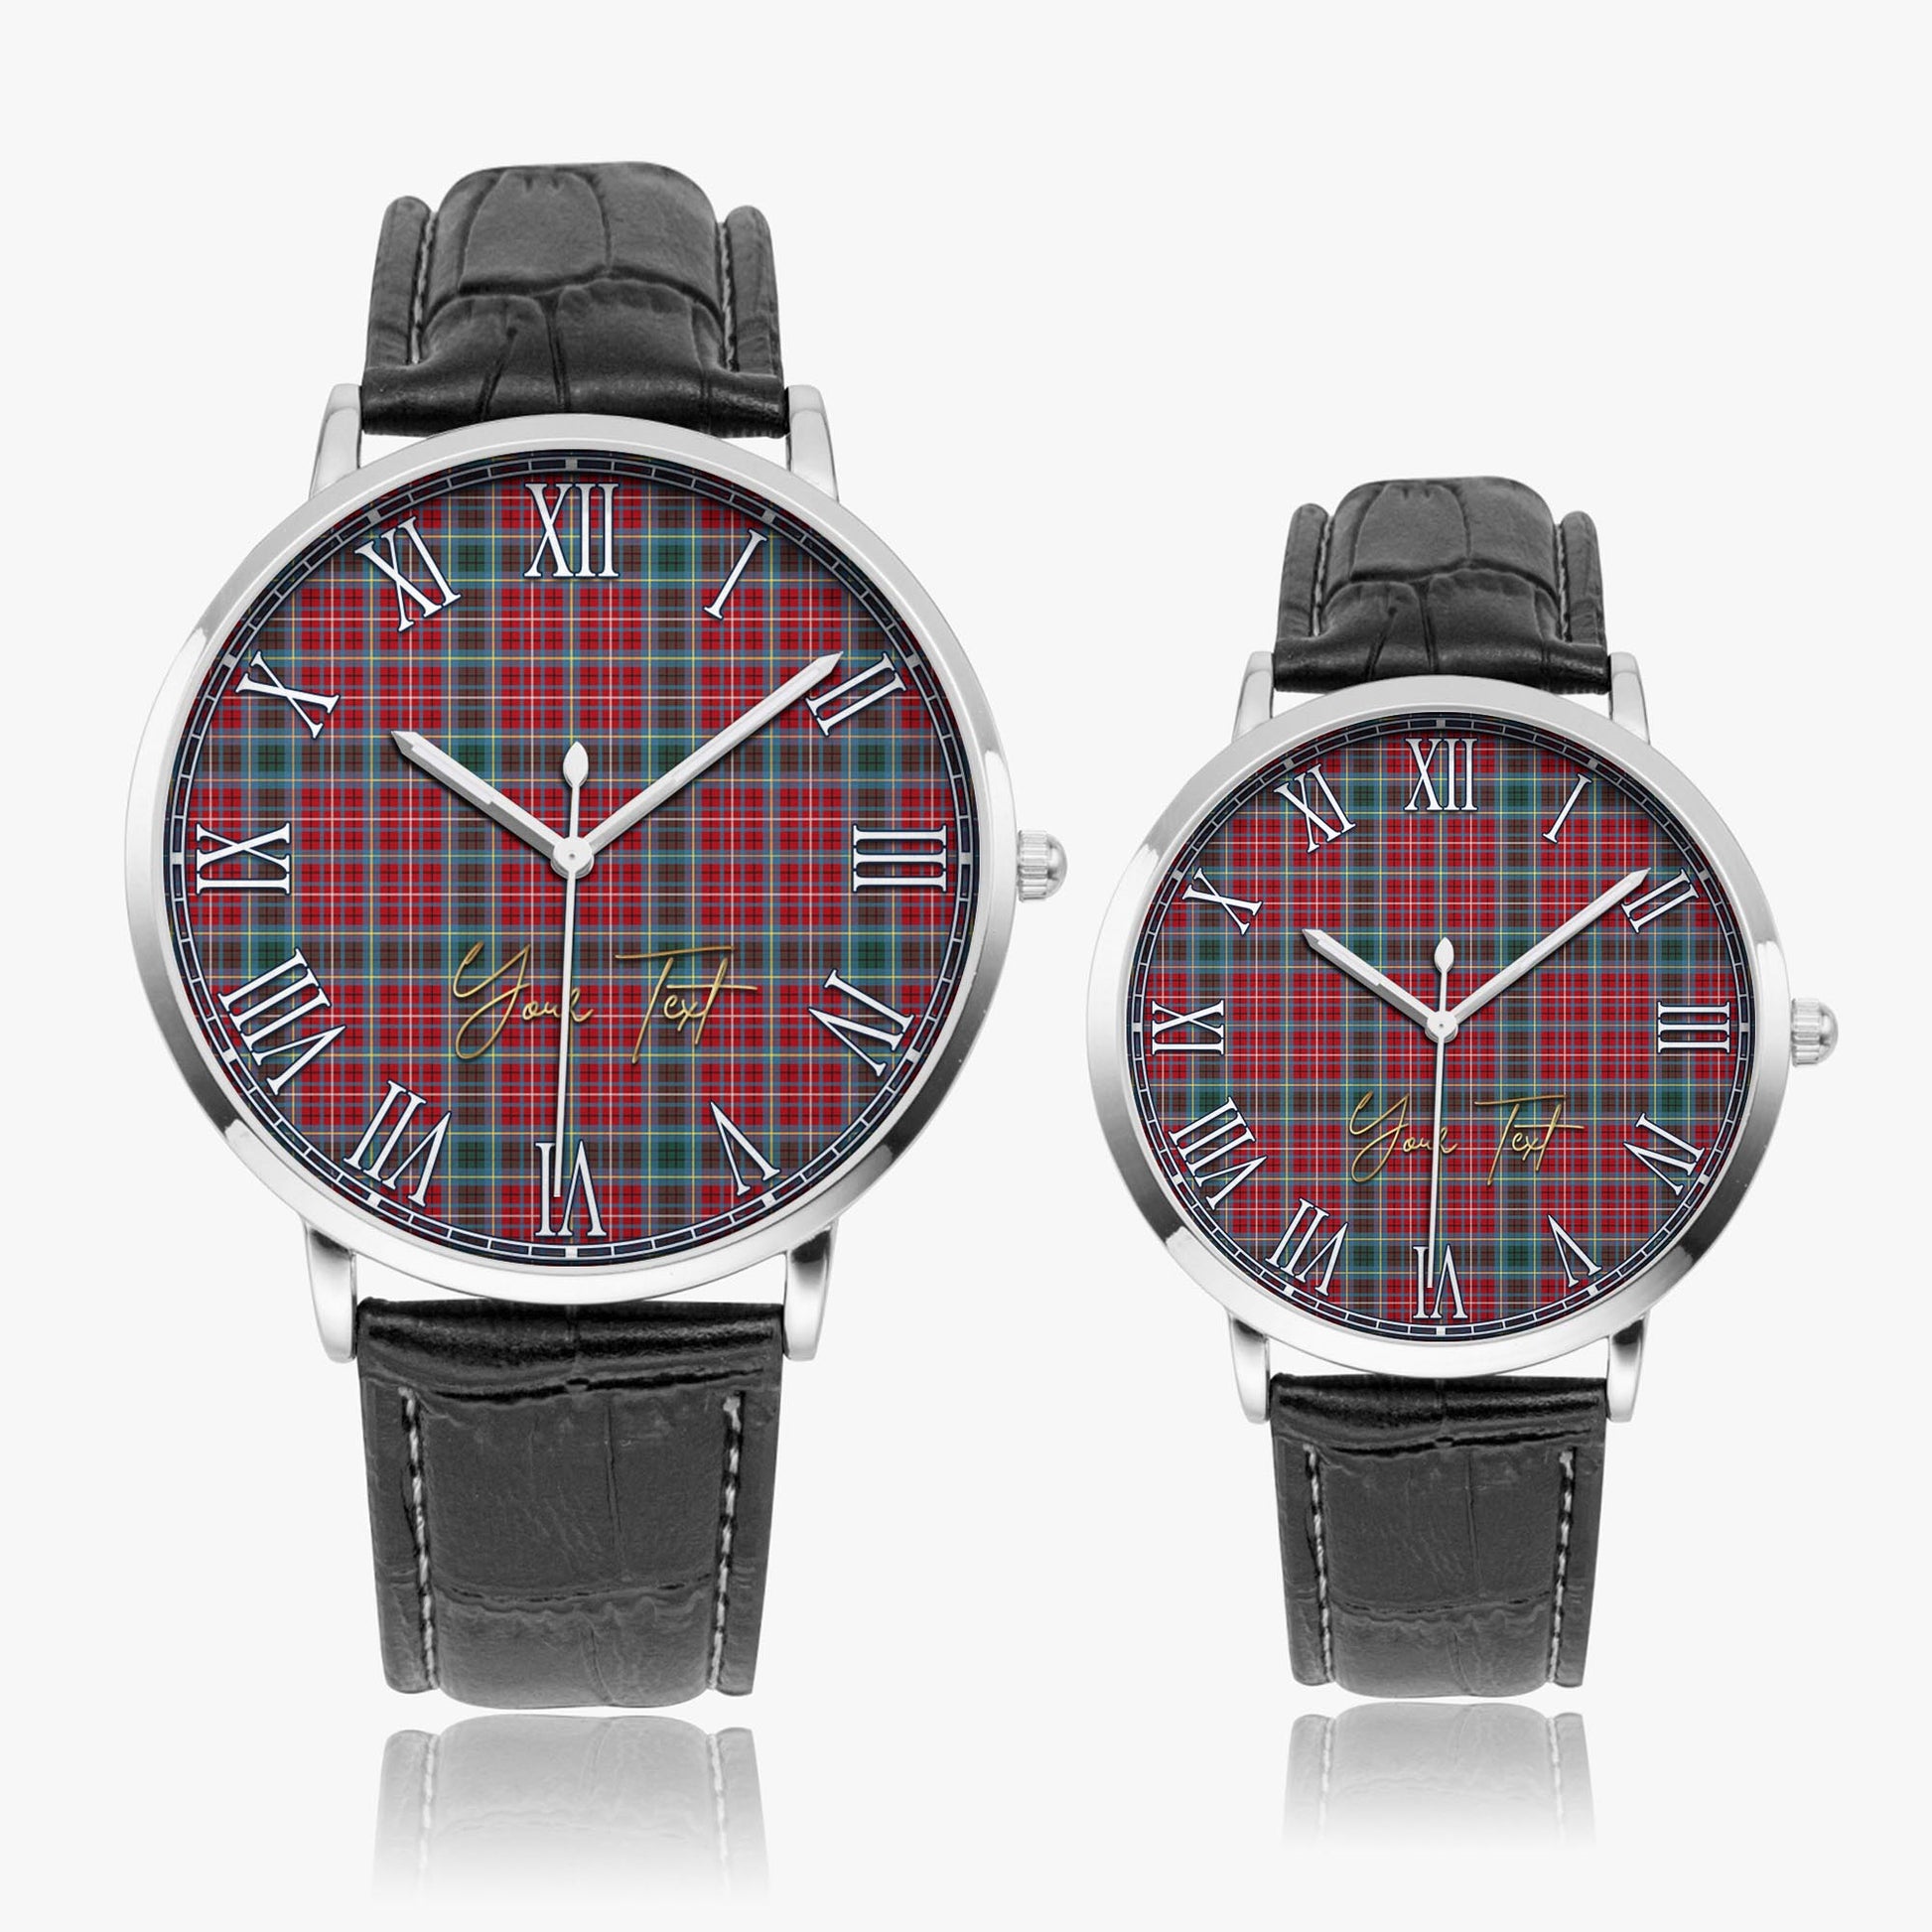 British Columbia Province Canada Tartan Personalized Your Text Leather Trap Quartz Watch Ultra Thin Silver Case With Black Leather Strap - Tartanvibesclothing